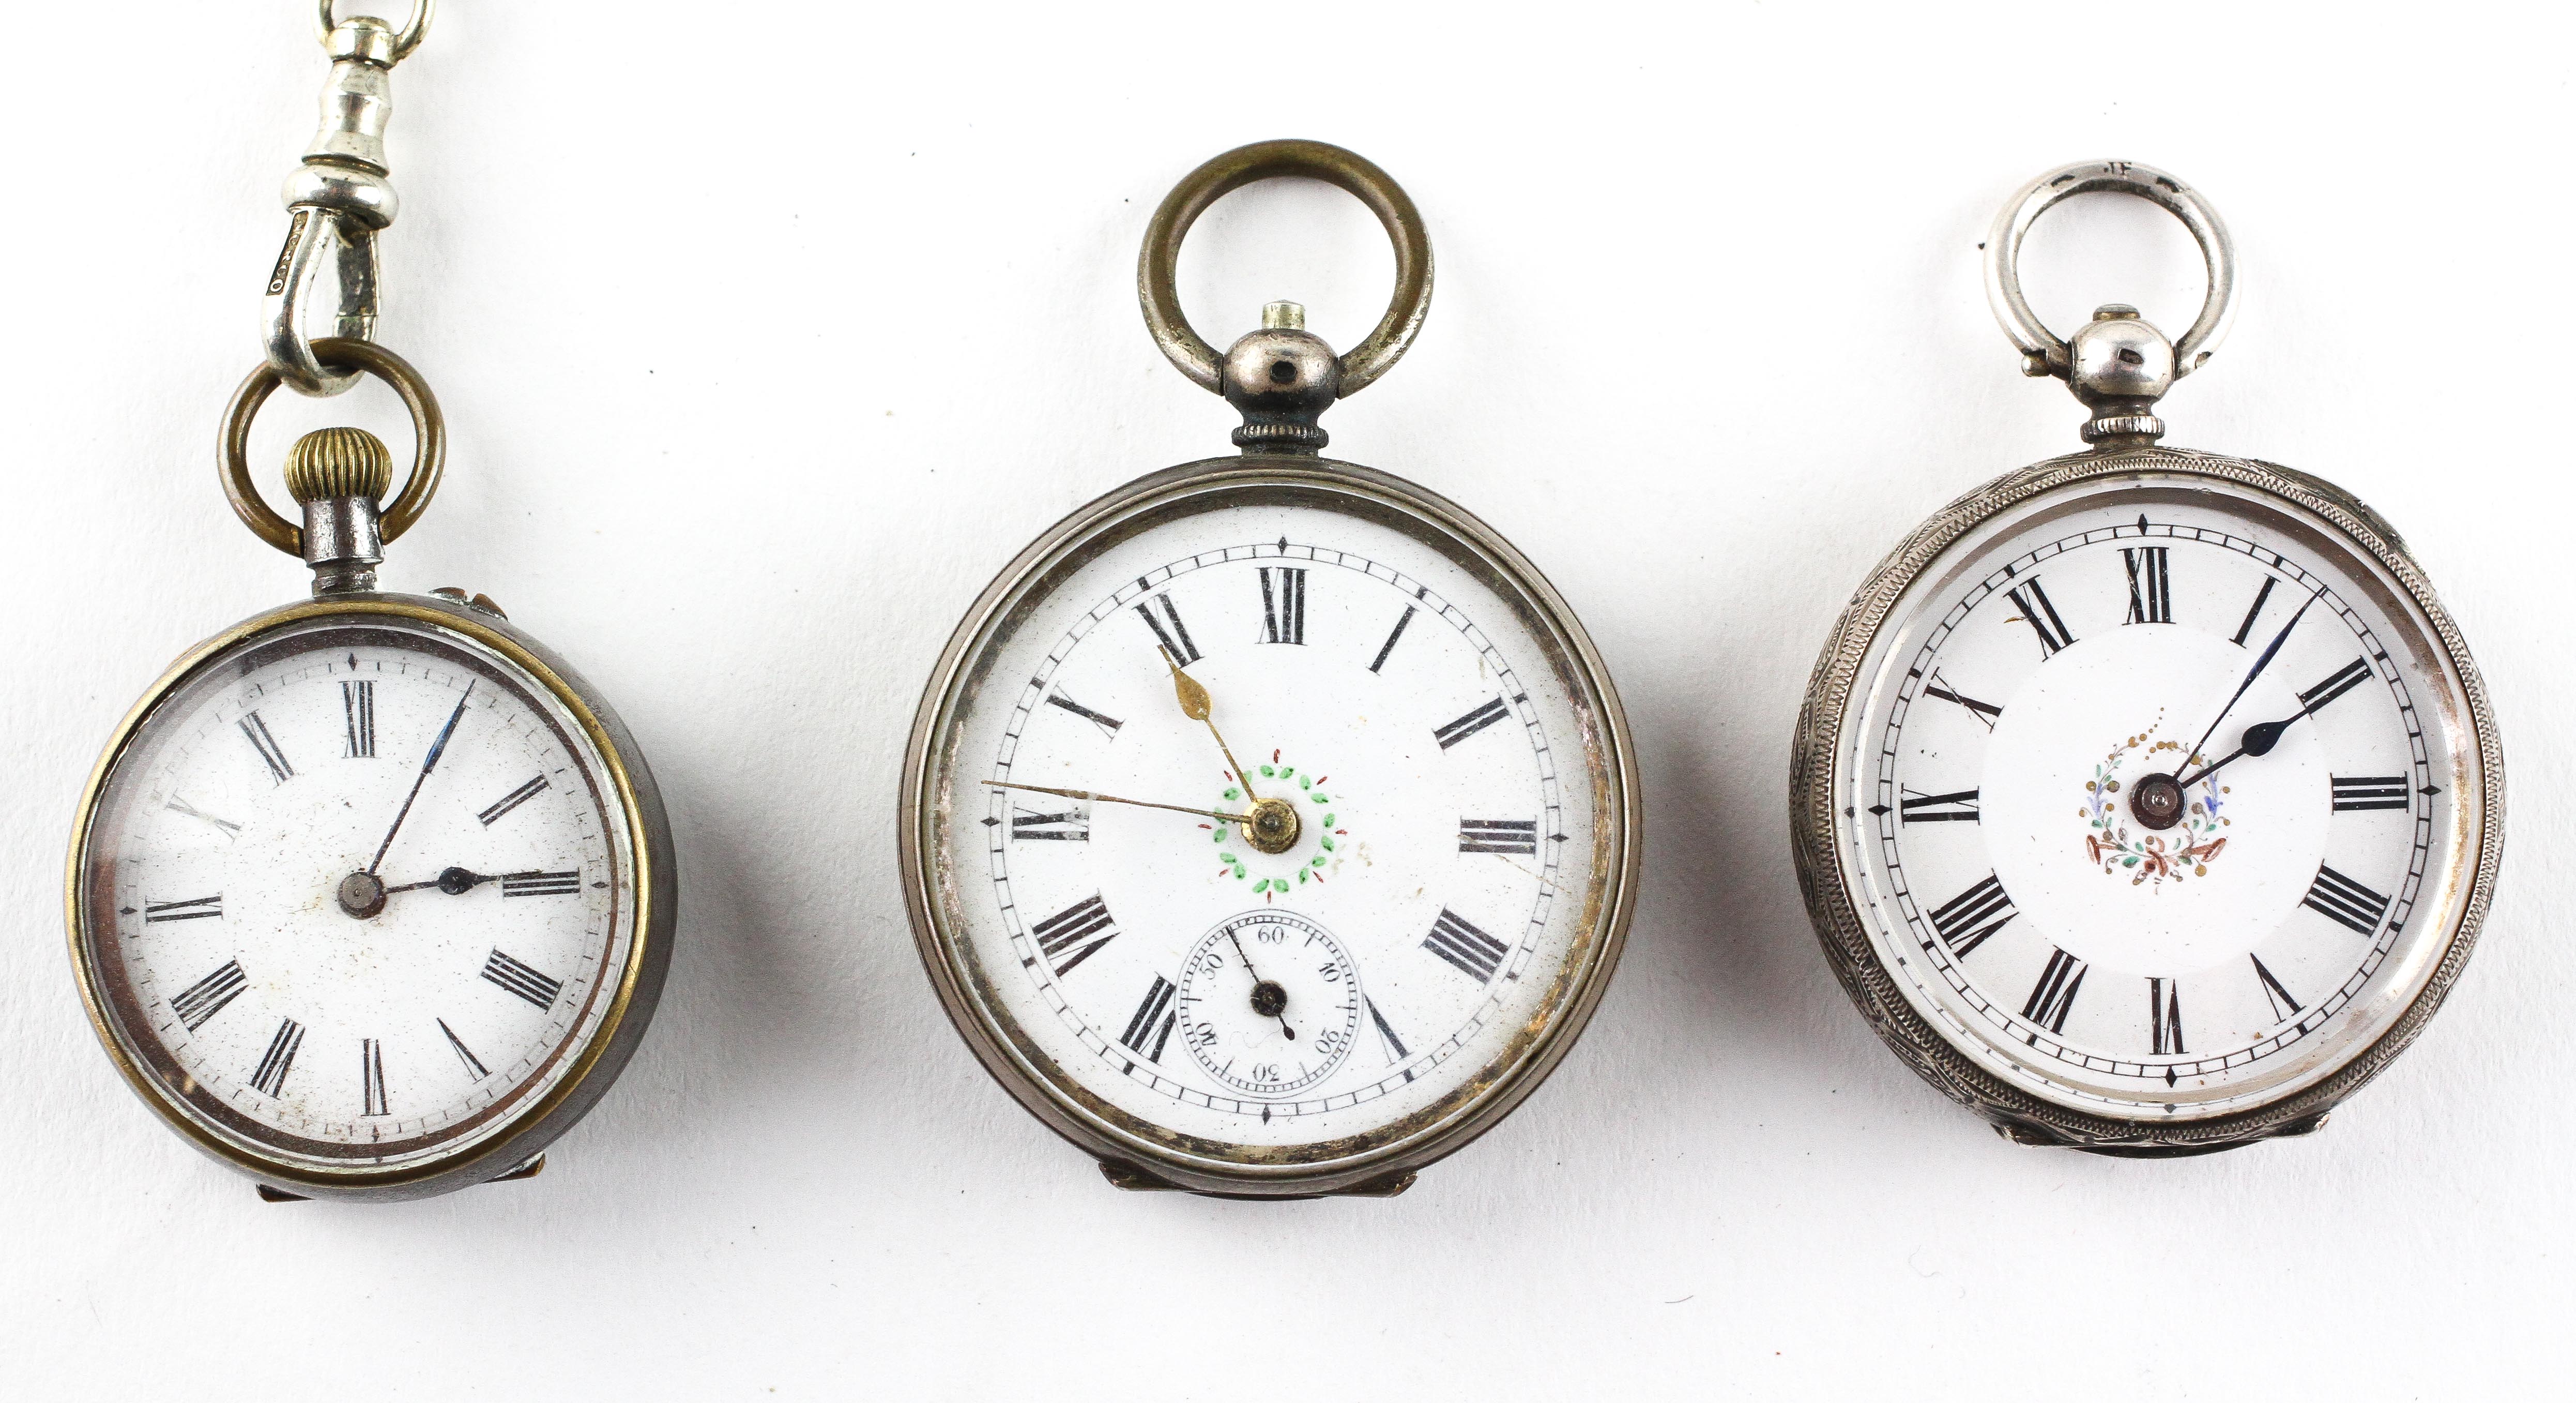 silver 0.935 open face pocket watch together with two base metal pocket watches